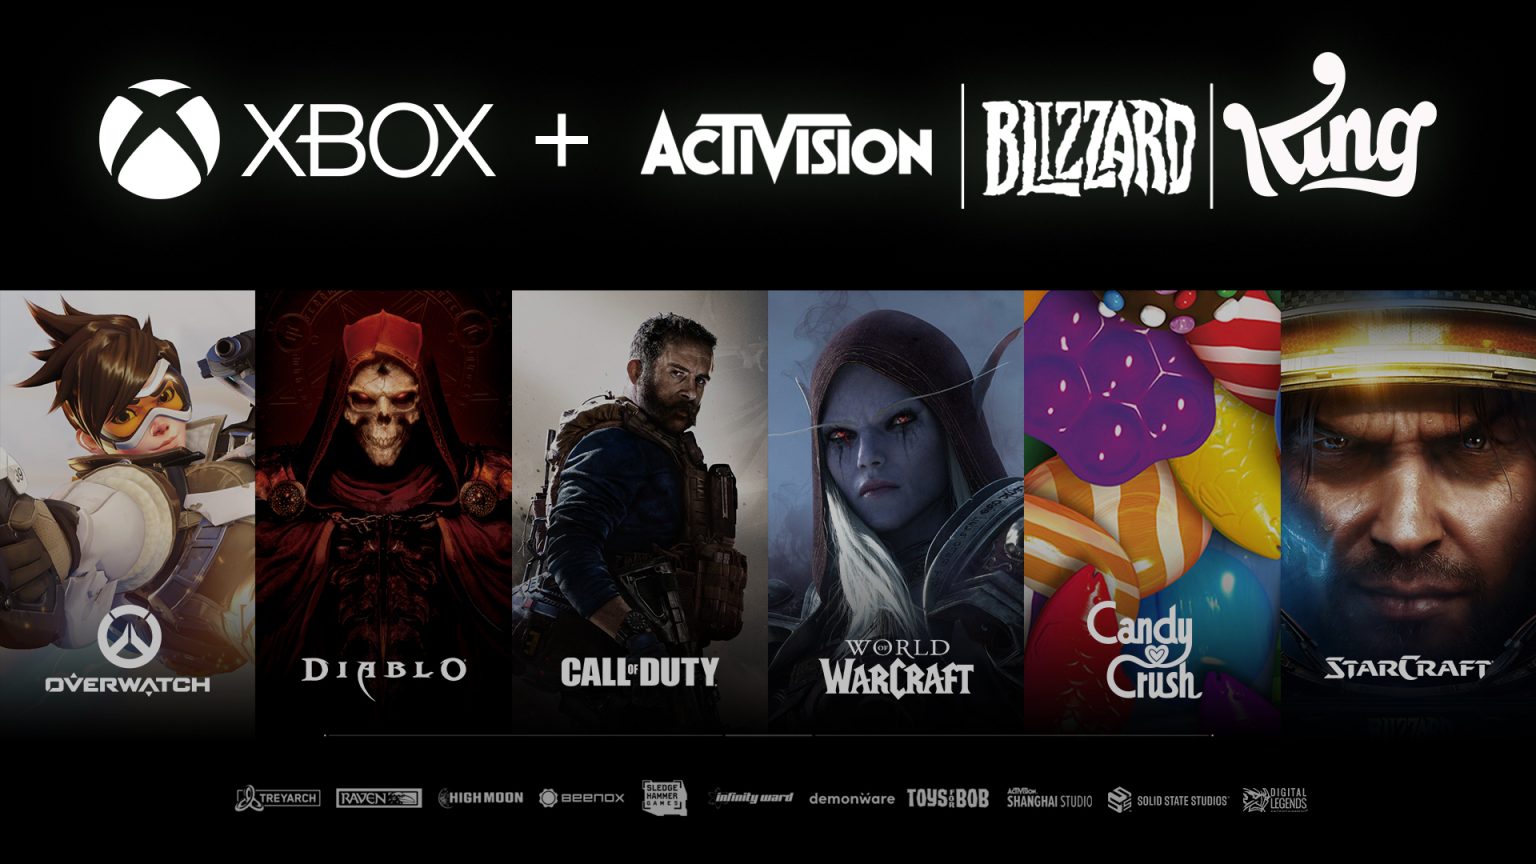 It's Official: Microsoft Has Bought Activision Blizzard for $69 Billion -  IGN